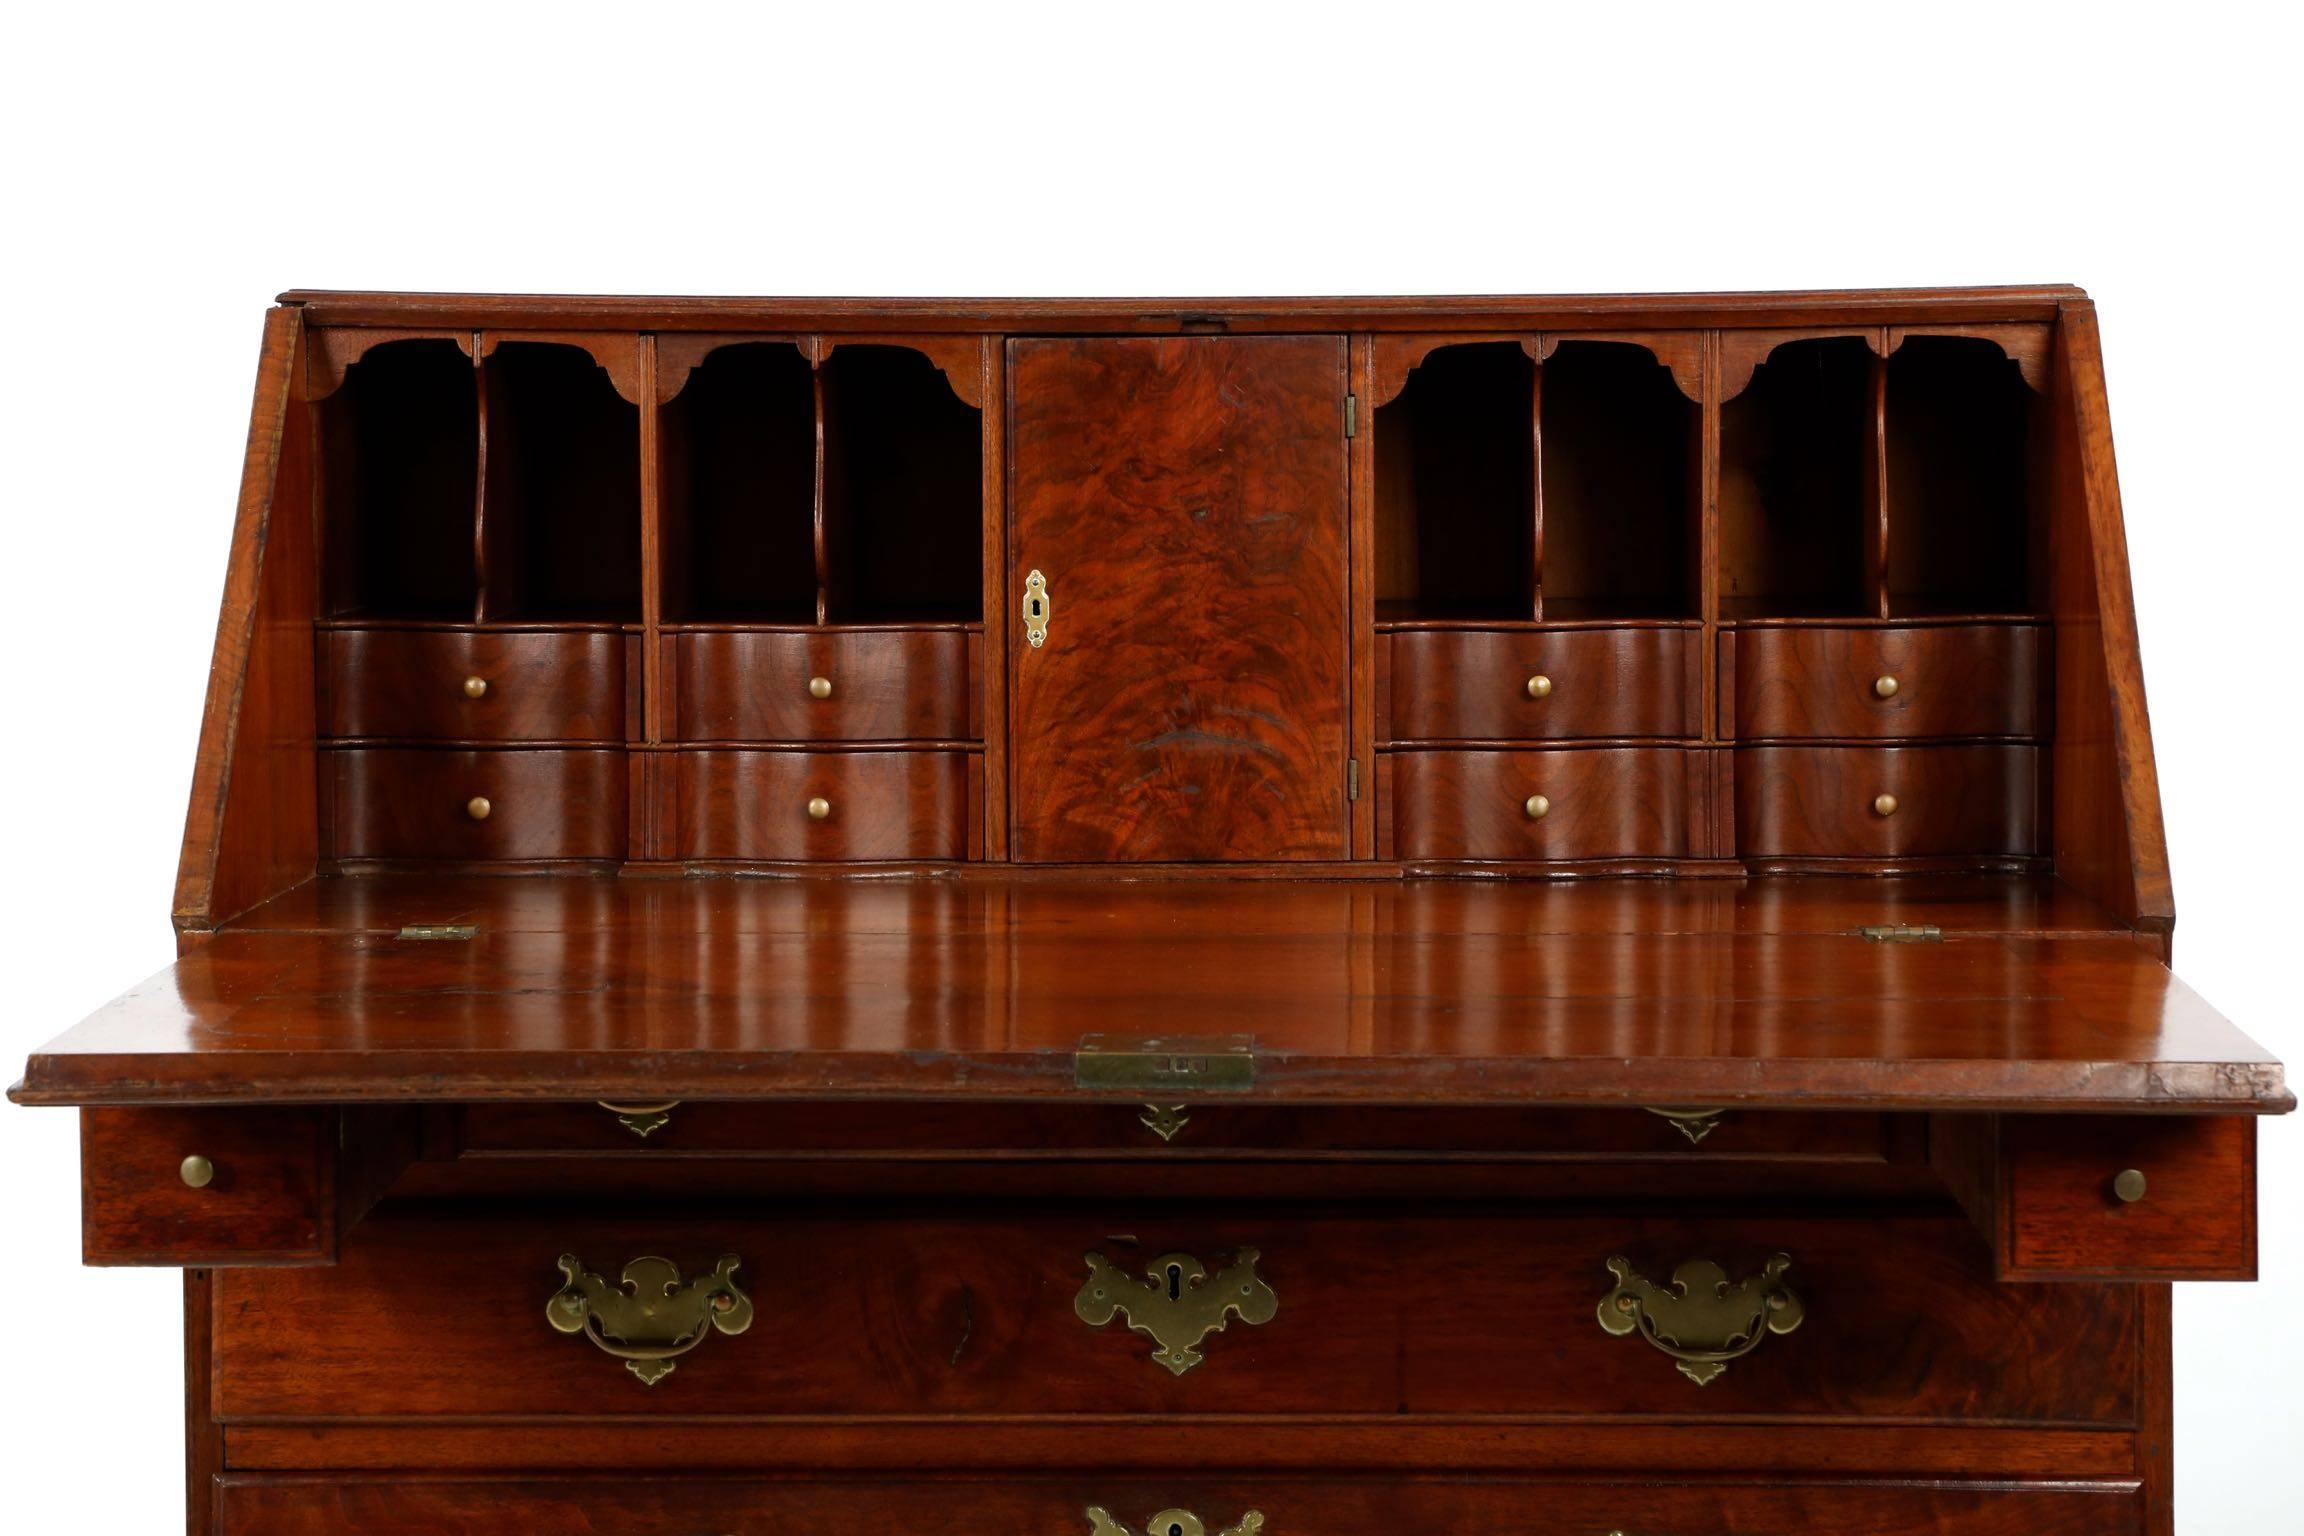 American Chippendale walnut slant lid desk, Philadelphia, circa 1785,
with presumed descent in the family of Thomas Livezey (1750-1830).


A very powerful desk with presence, there is great intensity in the burl walnut planks selected for the